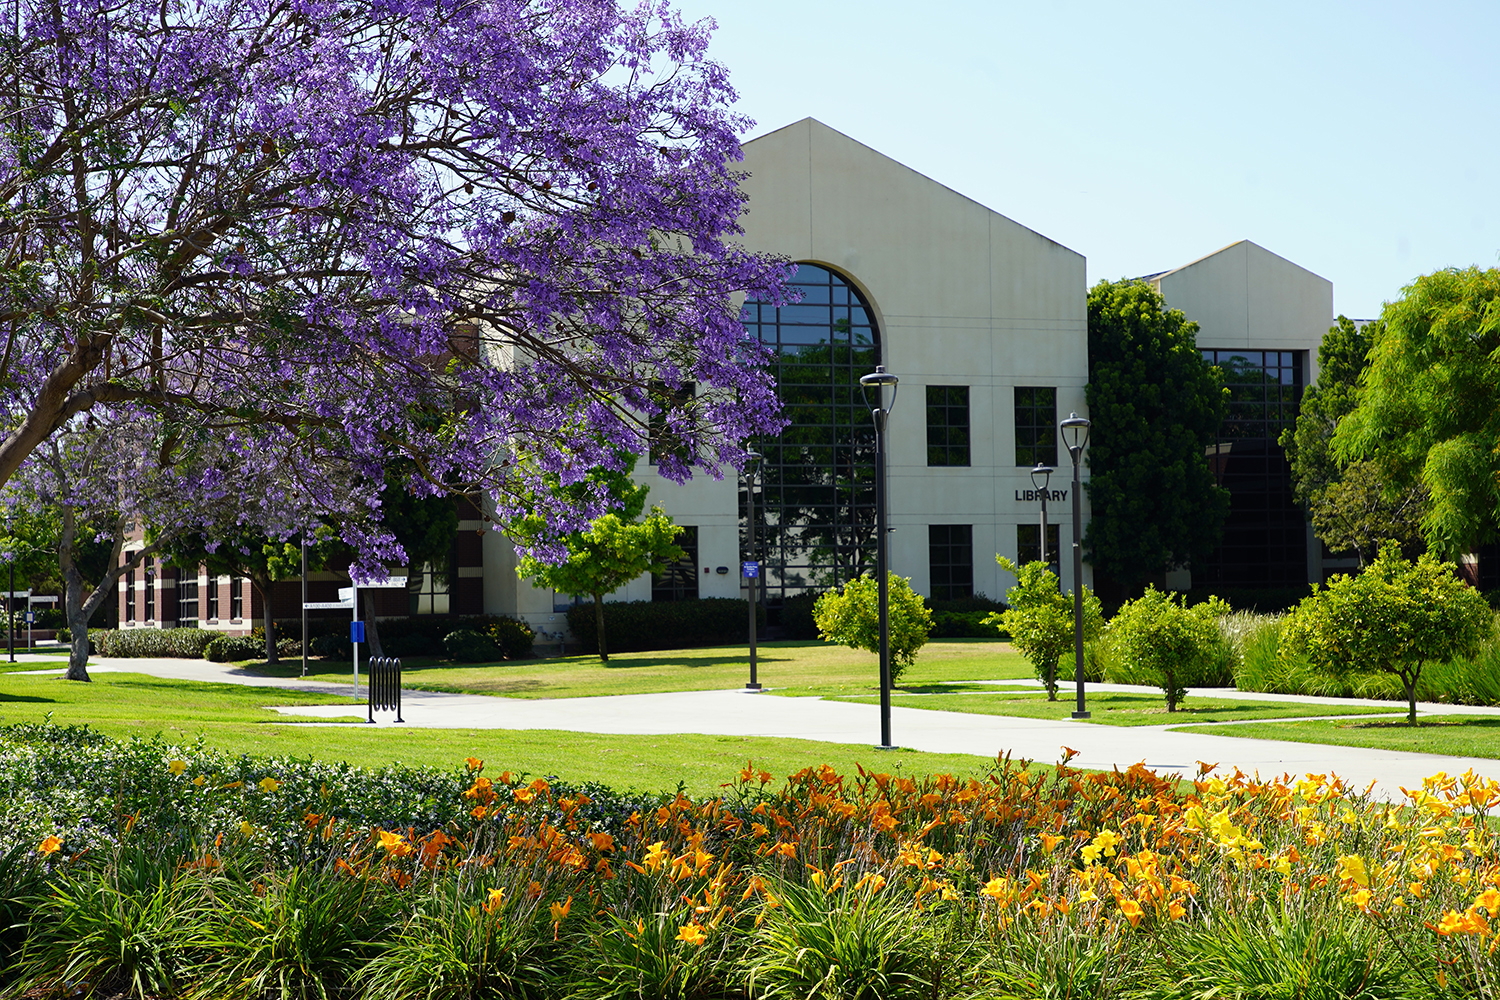 Photo of the IVC library building and campus landscaping